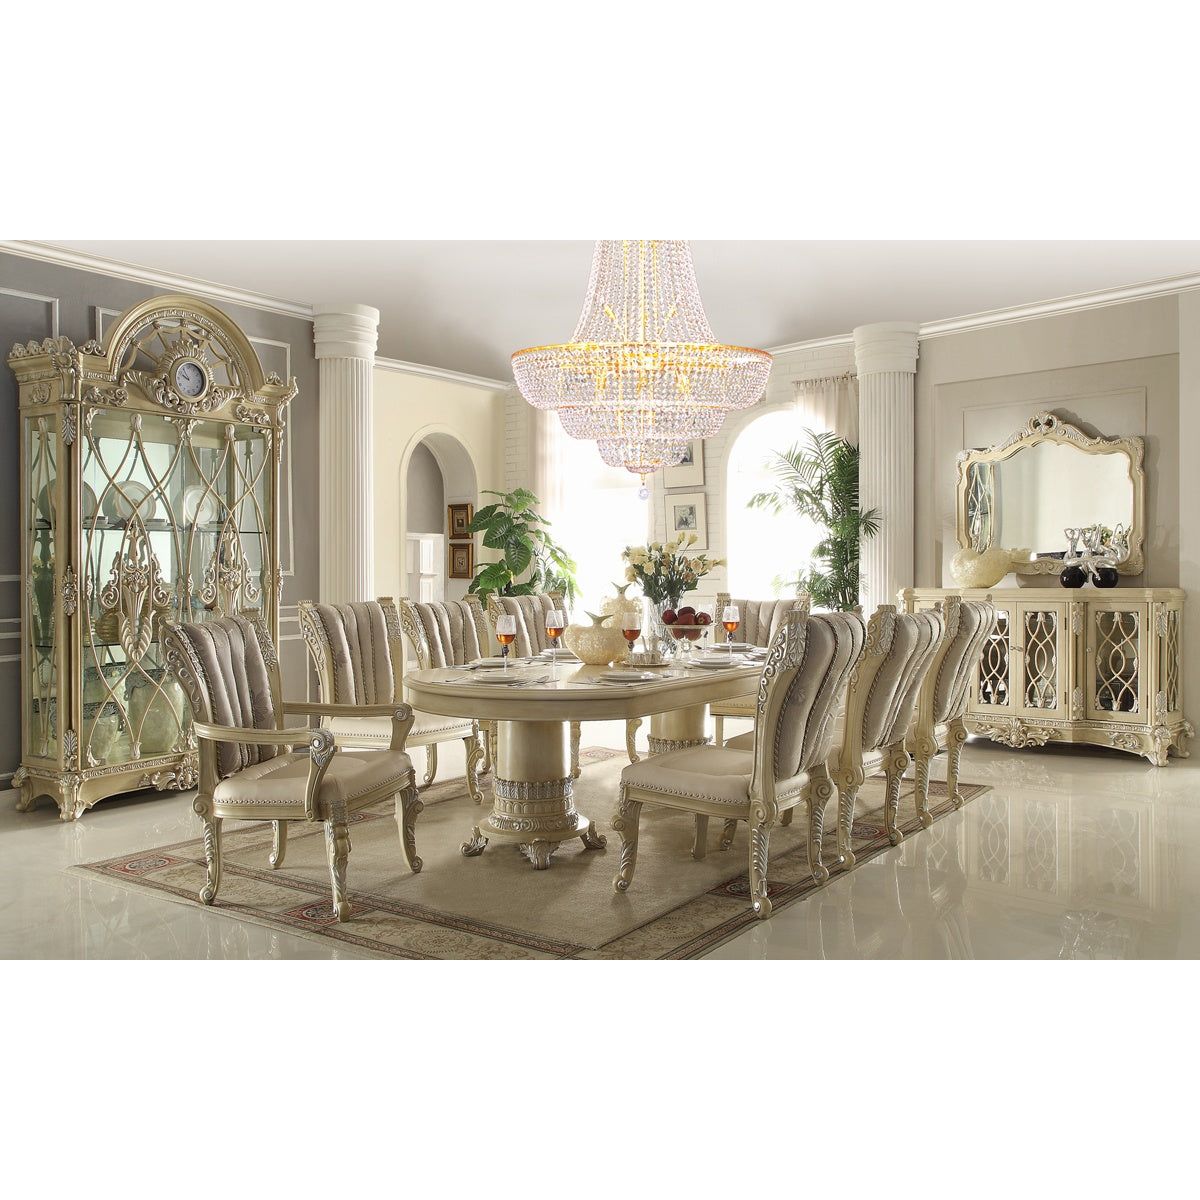 Homey Design HD-5800 - 7PC DINING TABLE SET - New Star Living